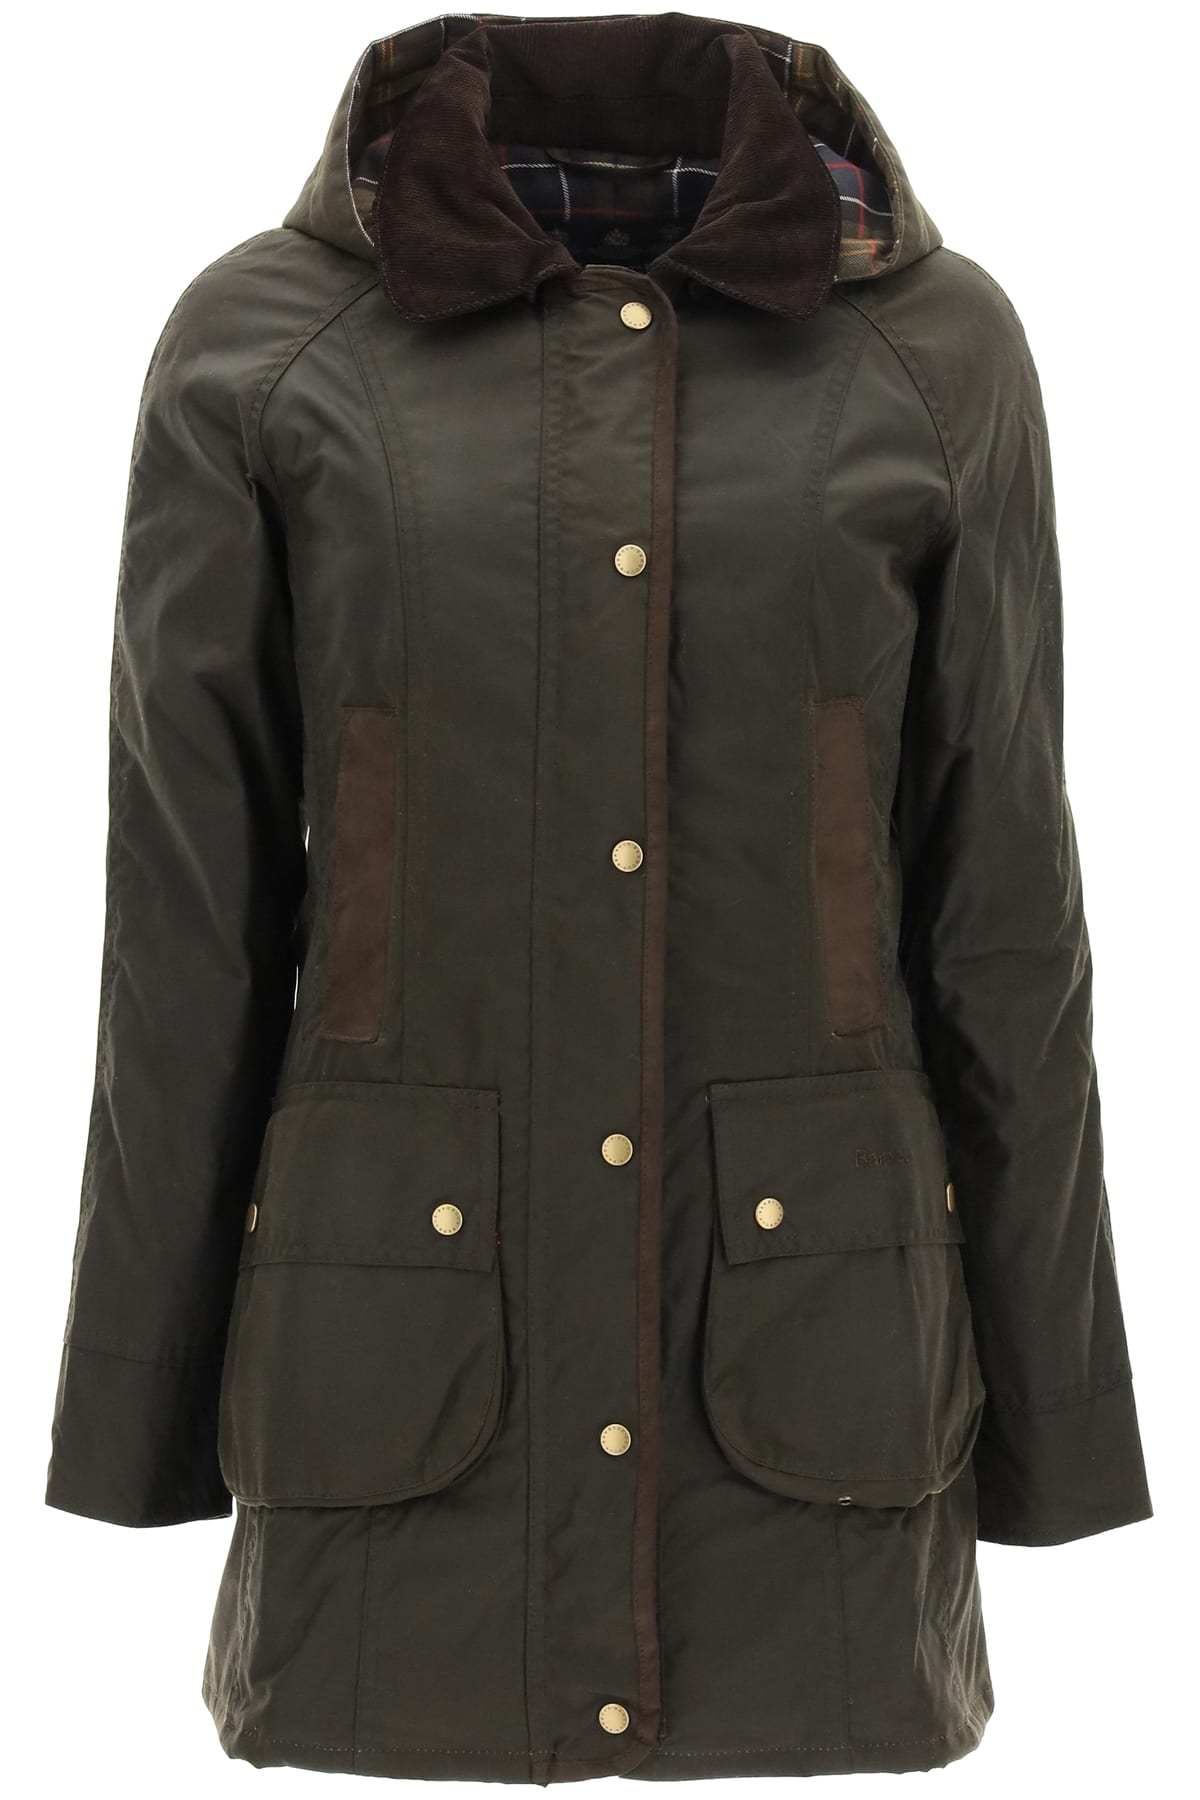 Barbour Bower Classic Jacket